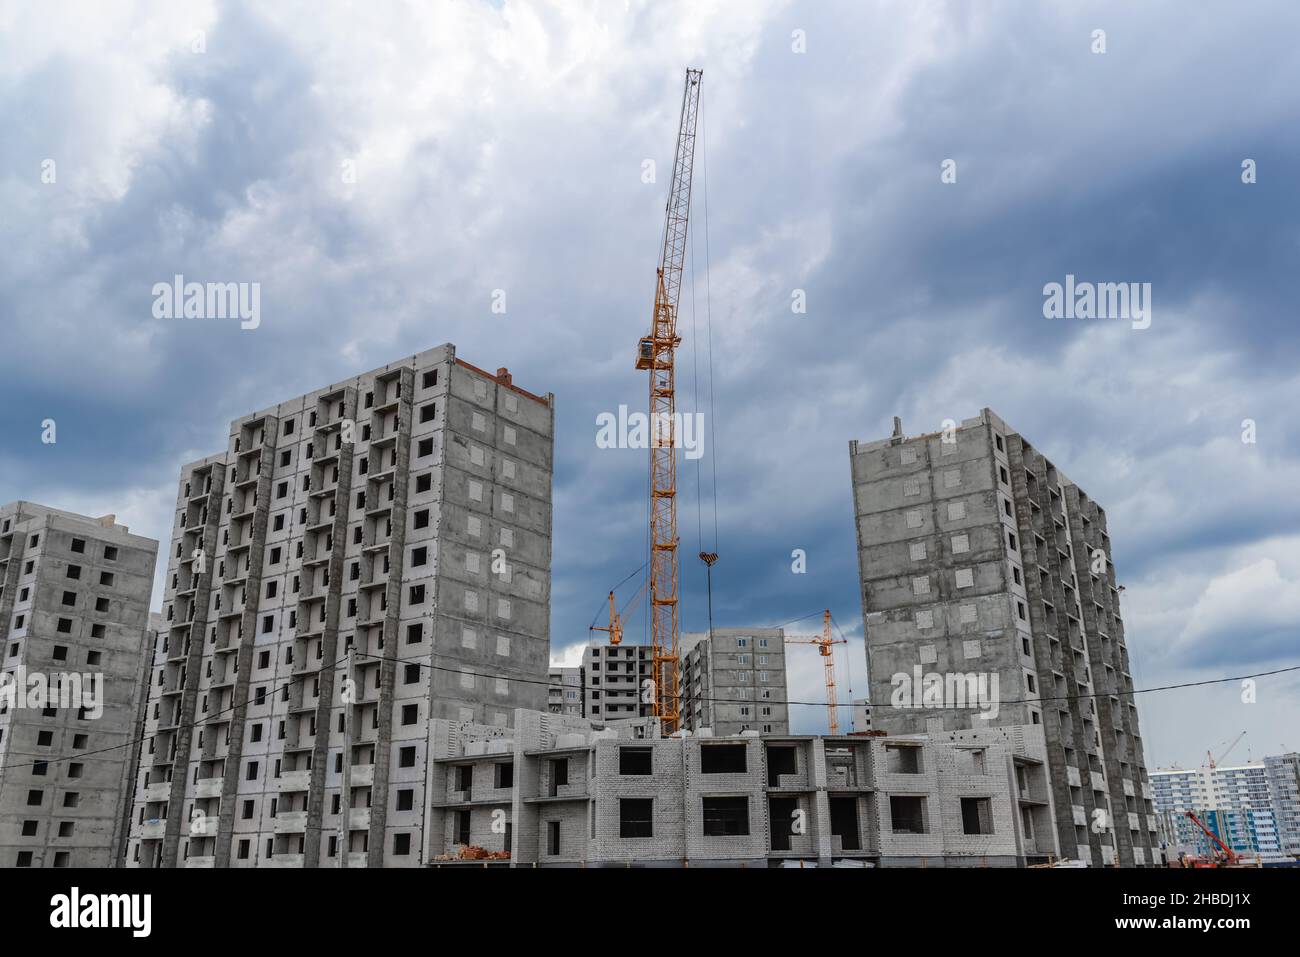 Crane and building construction site Stock Photo